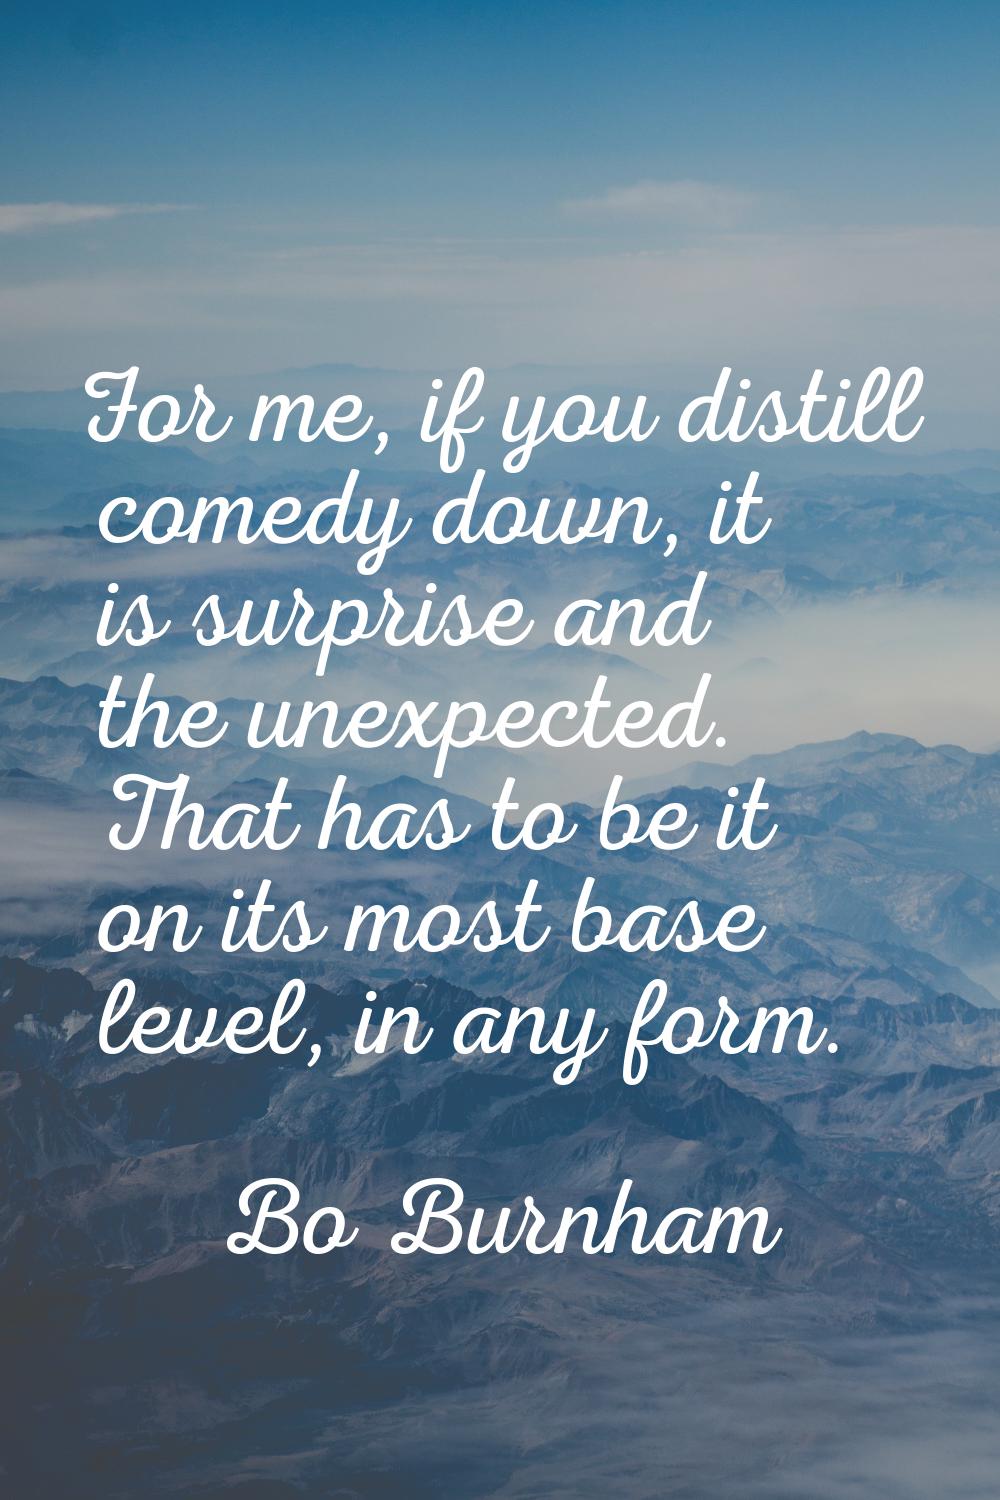 For me, if you distill comedy down, it is surprise and the unexpected. That has to be it on its mos